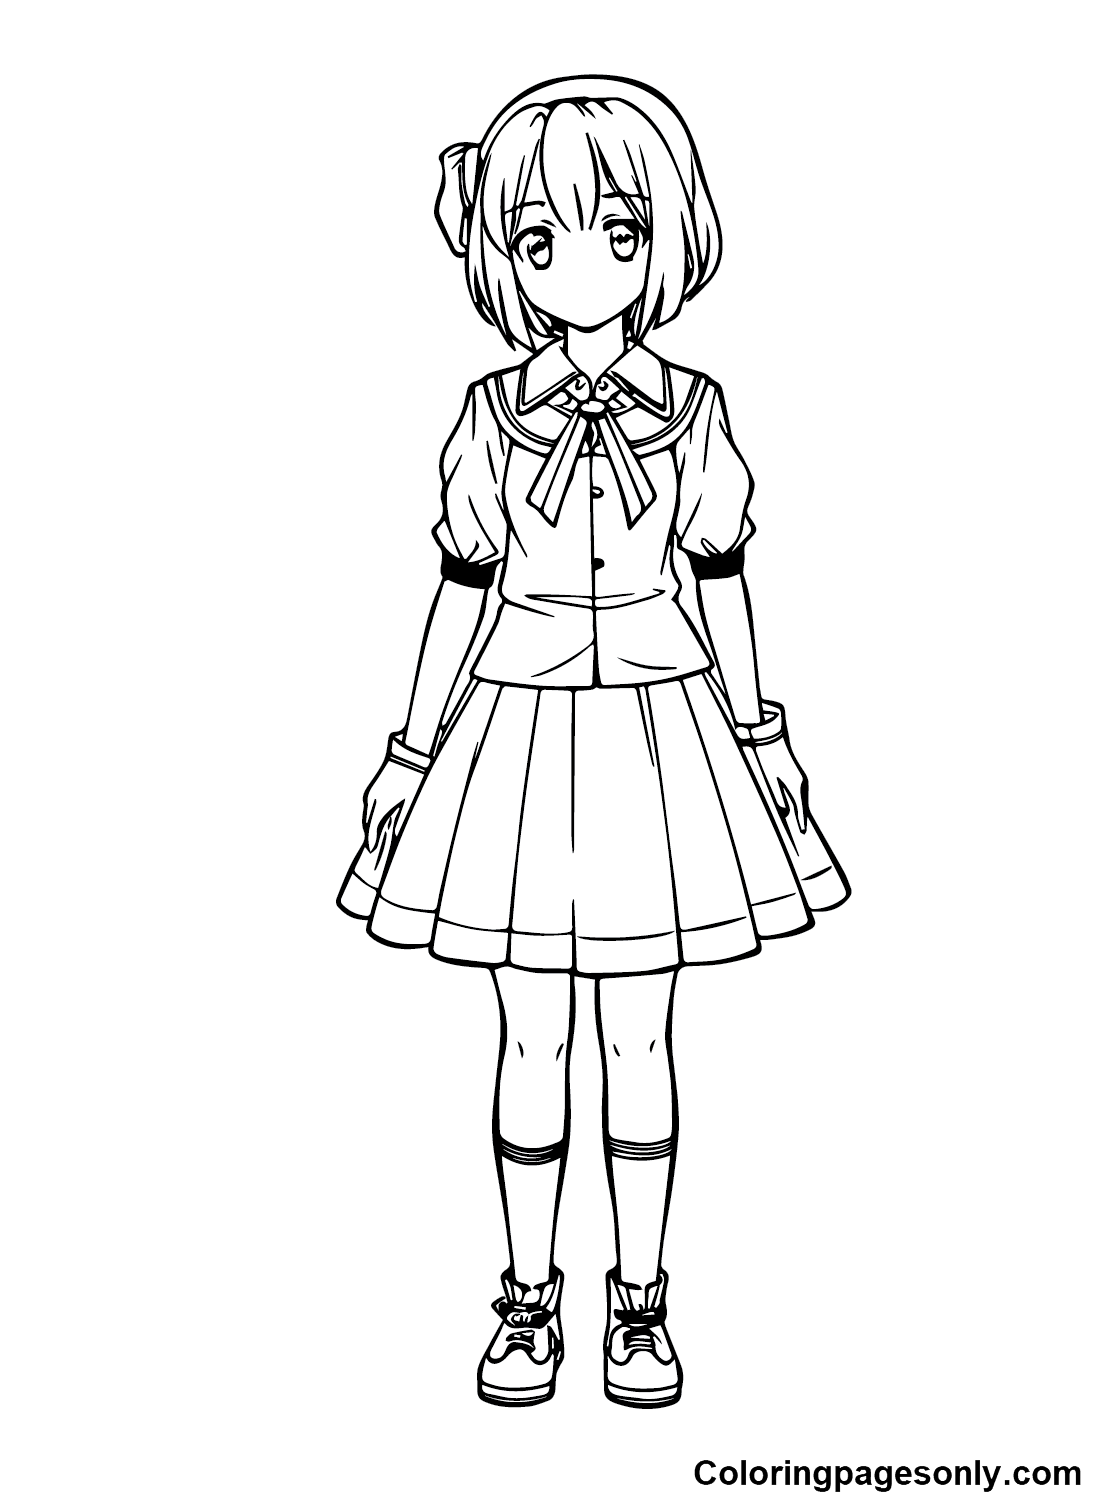 Blue Hair Anime Girl Coloring Pages